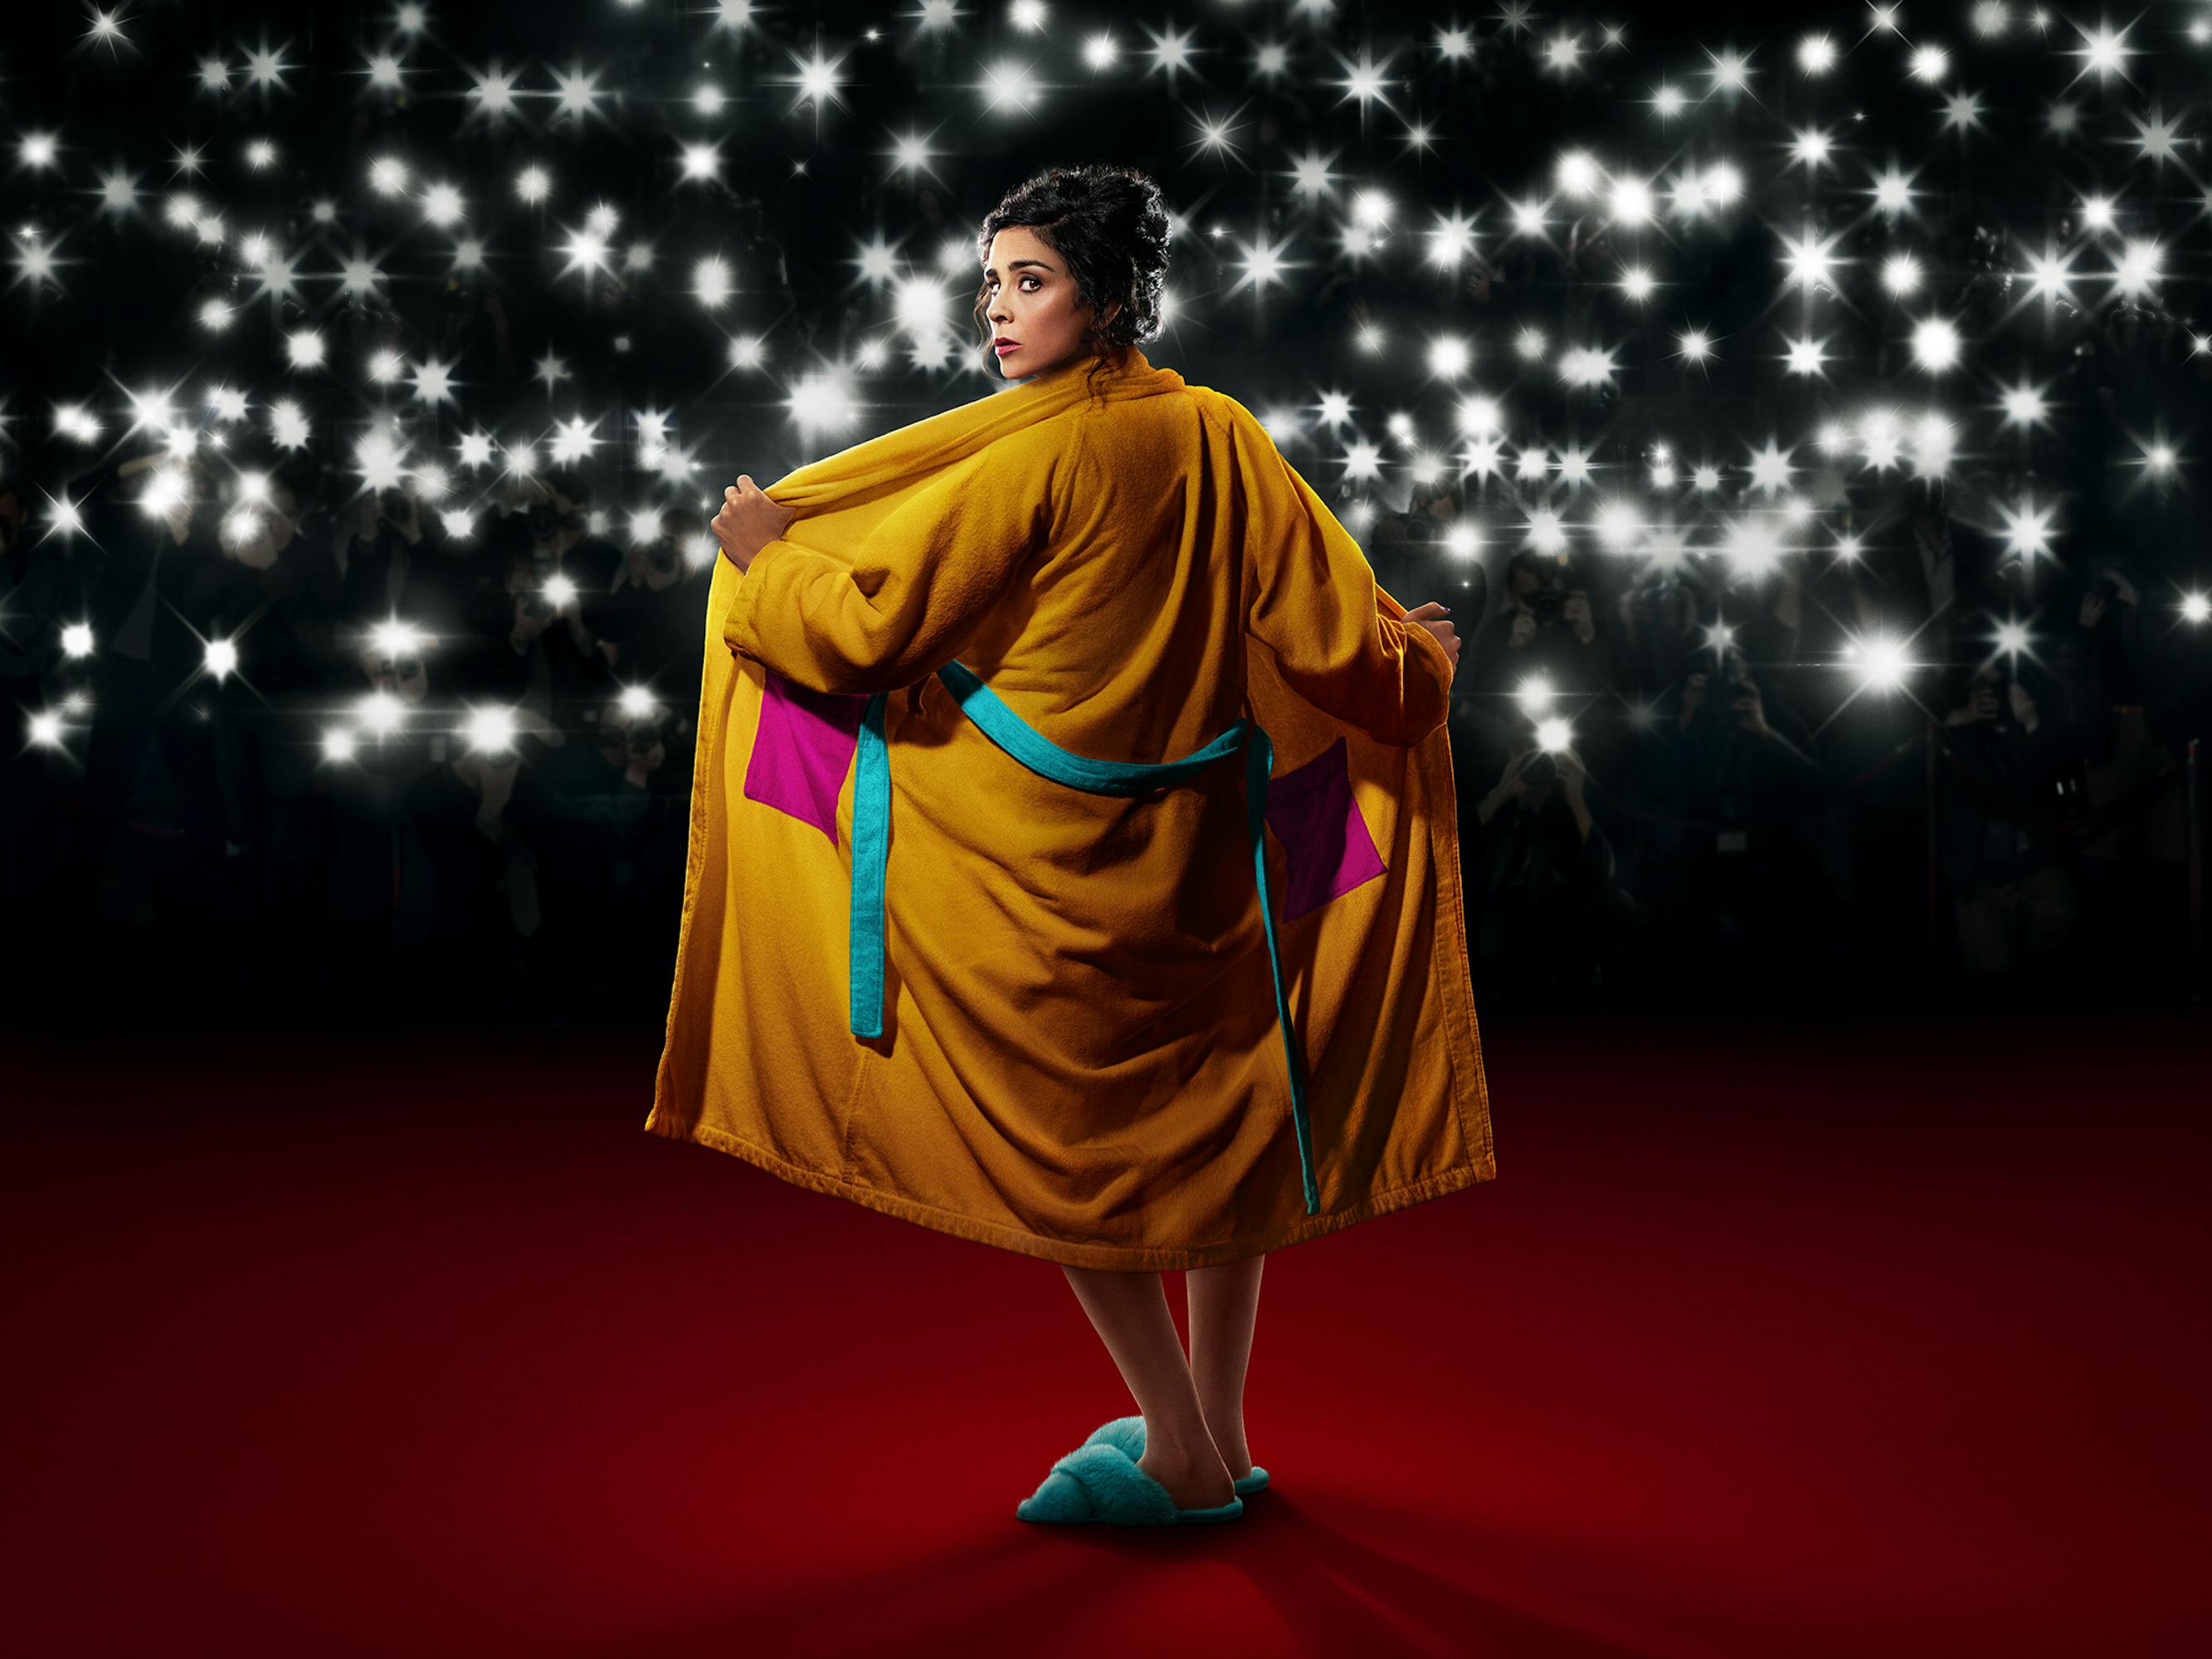 Sarah Silverman wears a yellow robe and opens it up to a crowd of paparazzi. 